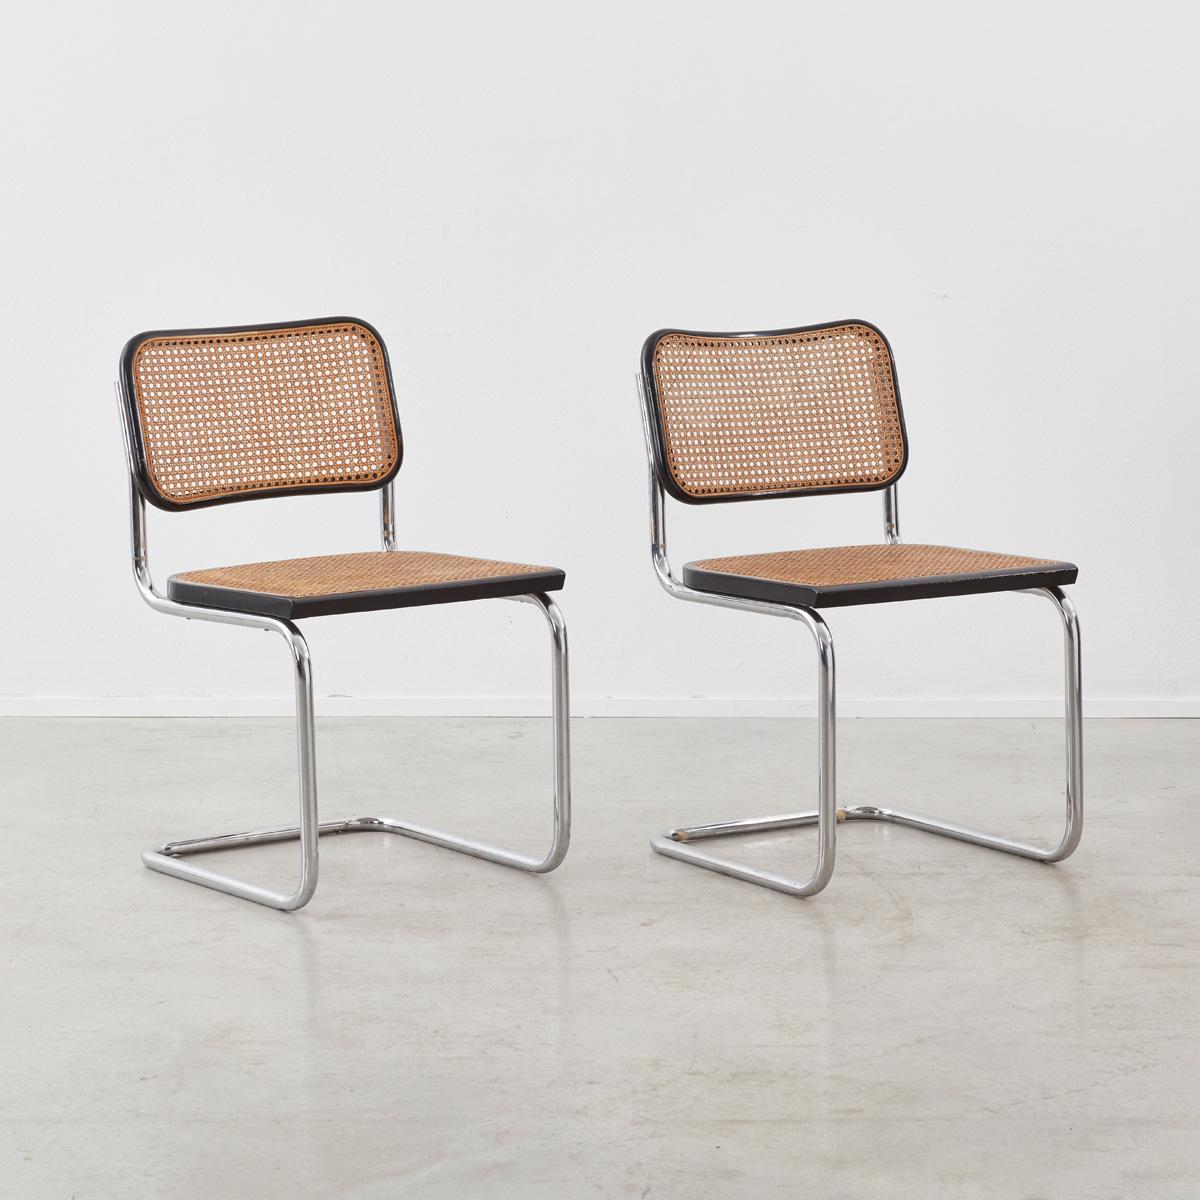 Modern Marcel Breuer Attributed Cesca Chair, Italy, circa 1970s